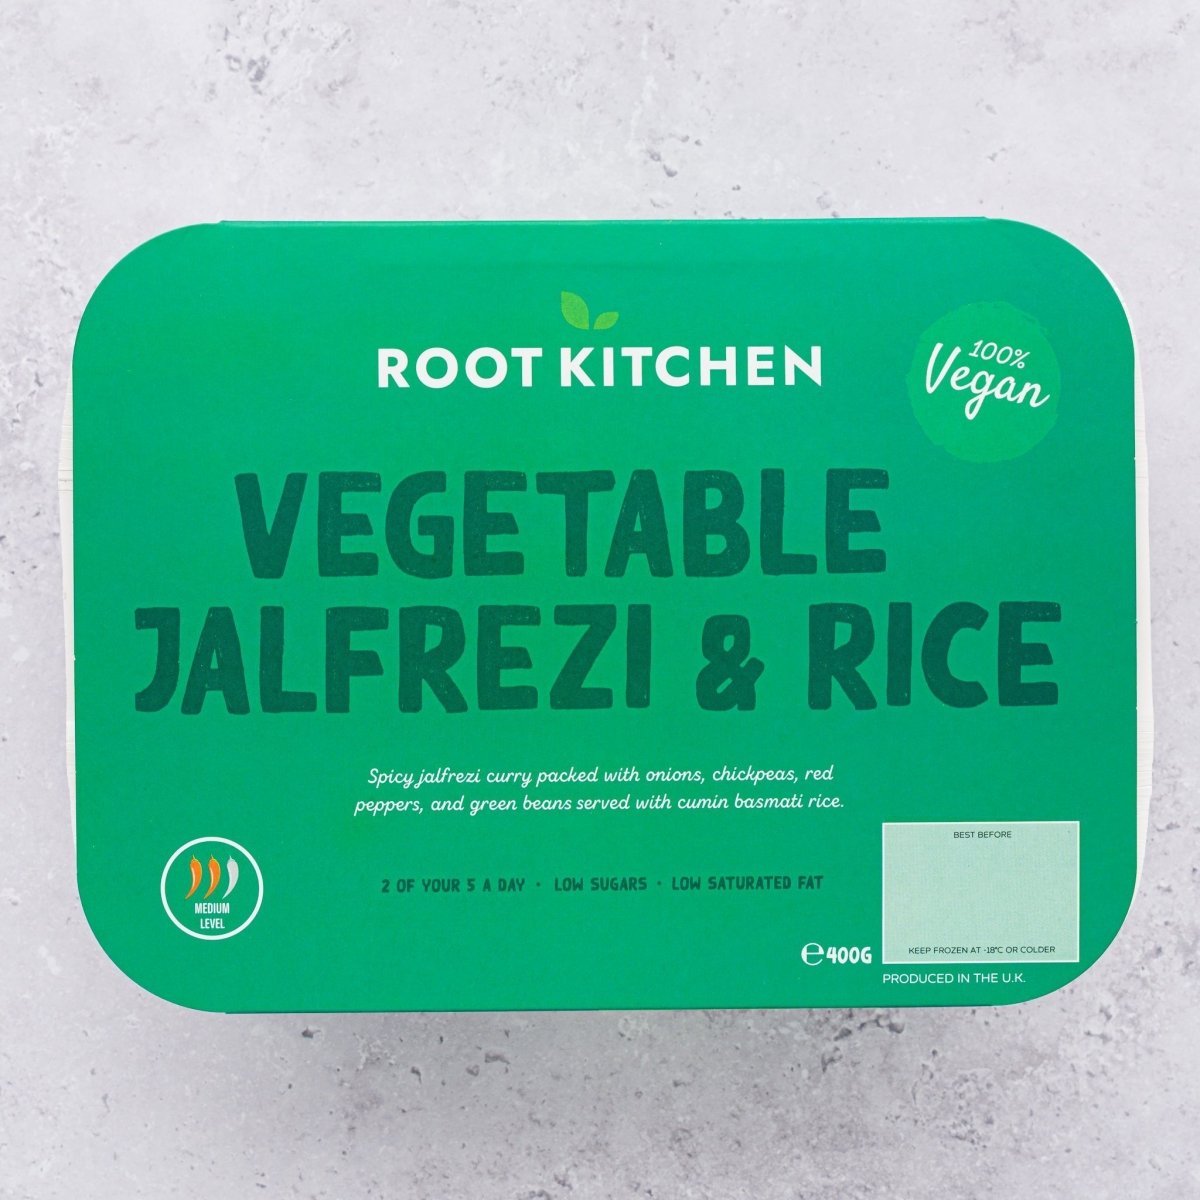 Vegetable Jalfrezi Curry And Rice - Root Kitchen